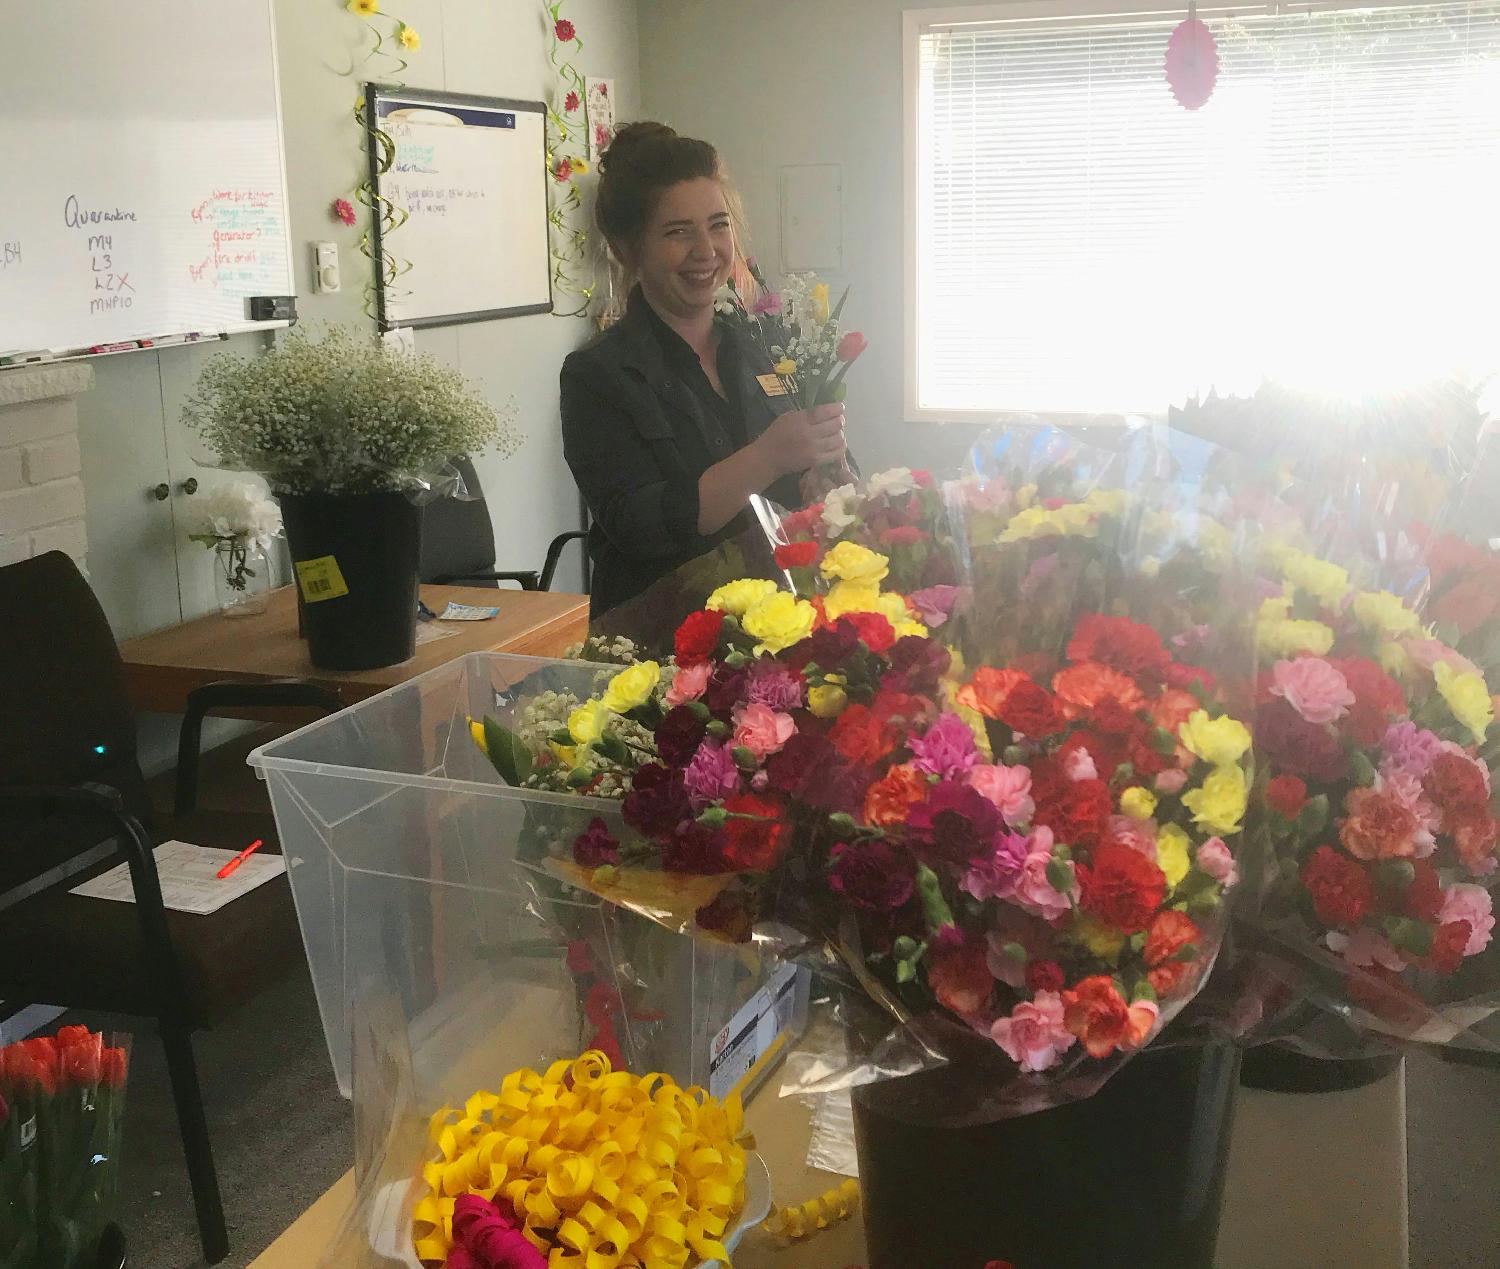 Putting Easter bouquets together for residents